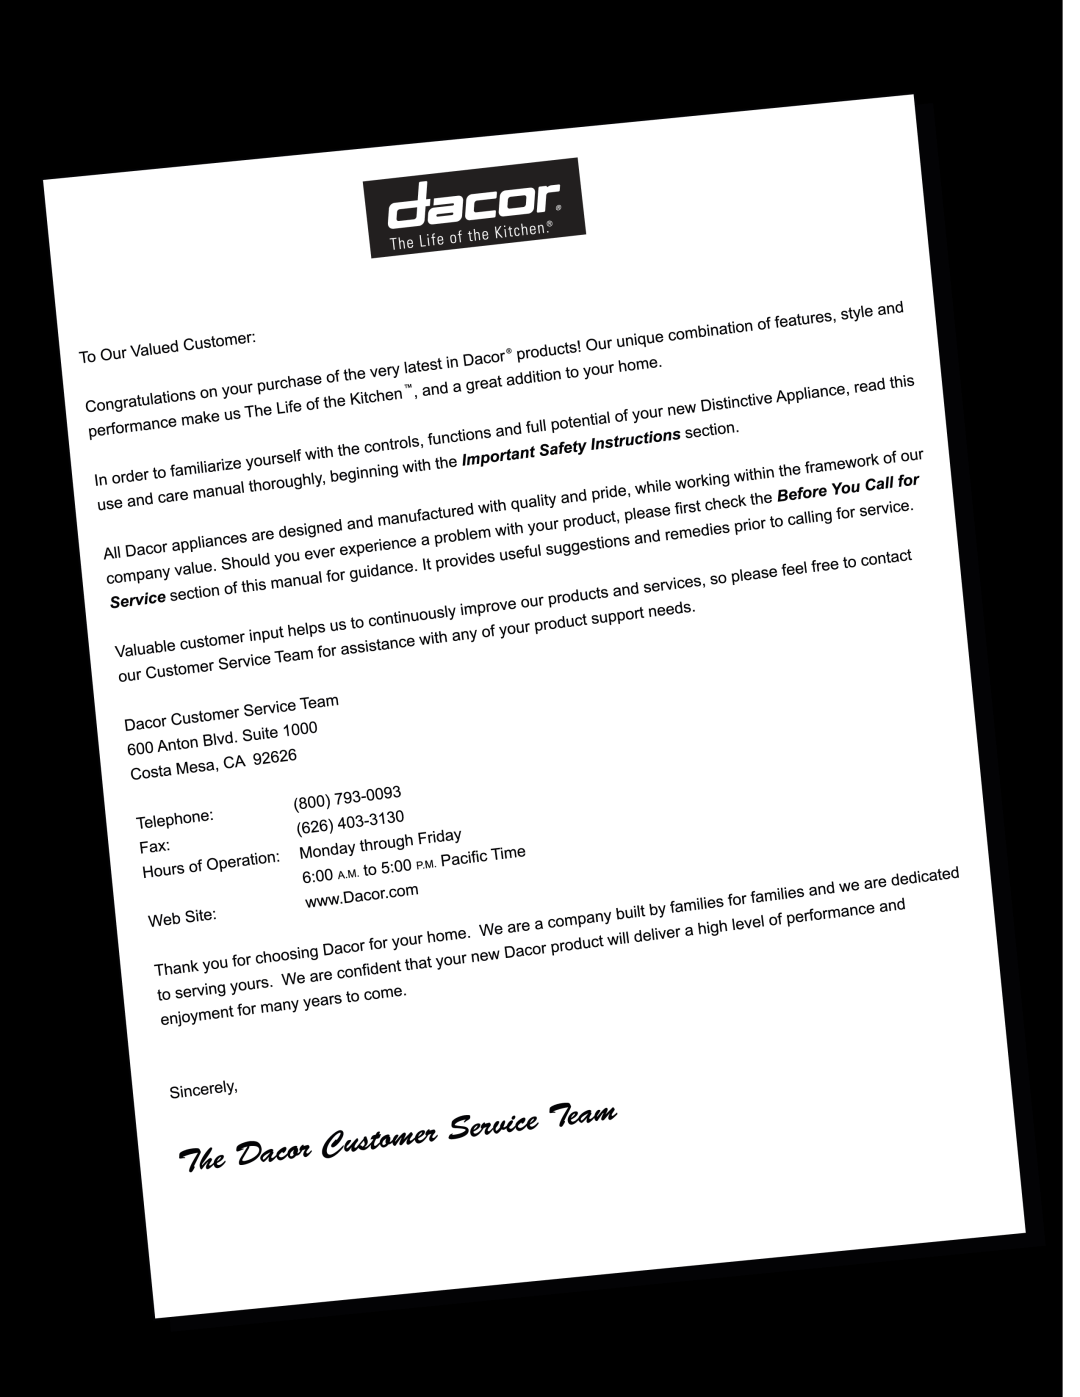 Dacor ERWD30 manual Dacor, all rights reserved 